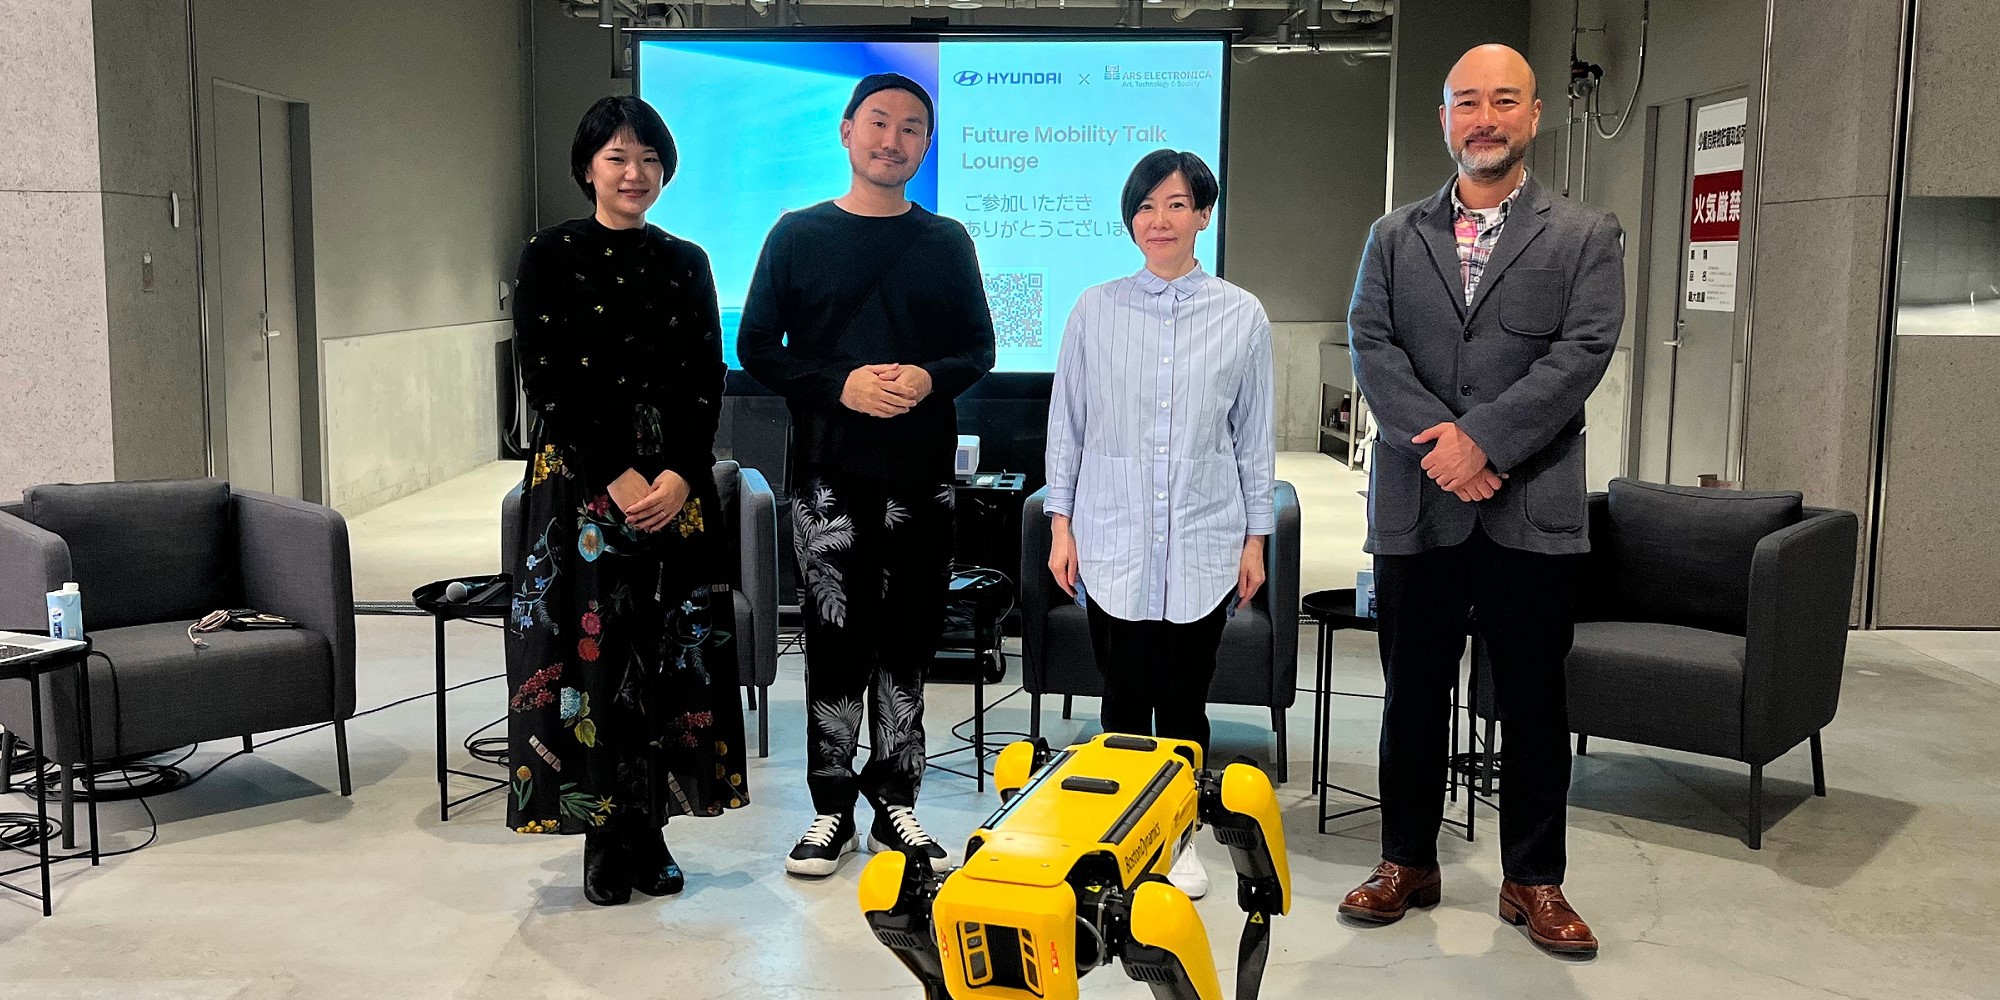 Talk session "What will mobility of the future look like?” with Hidemi Ichinose (Hyundai), Hideaki Ogawa and Kyoko Kunoh (Ars Electronica) and Takao Urabe (Hyundai) (from left to right).